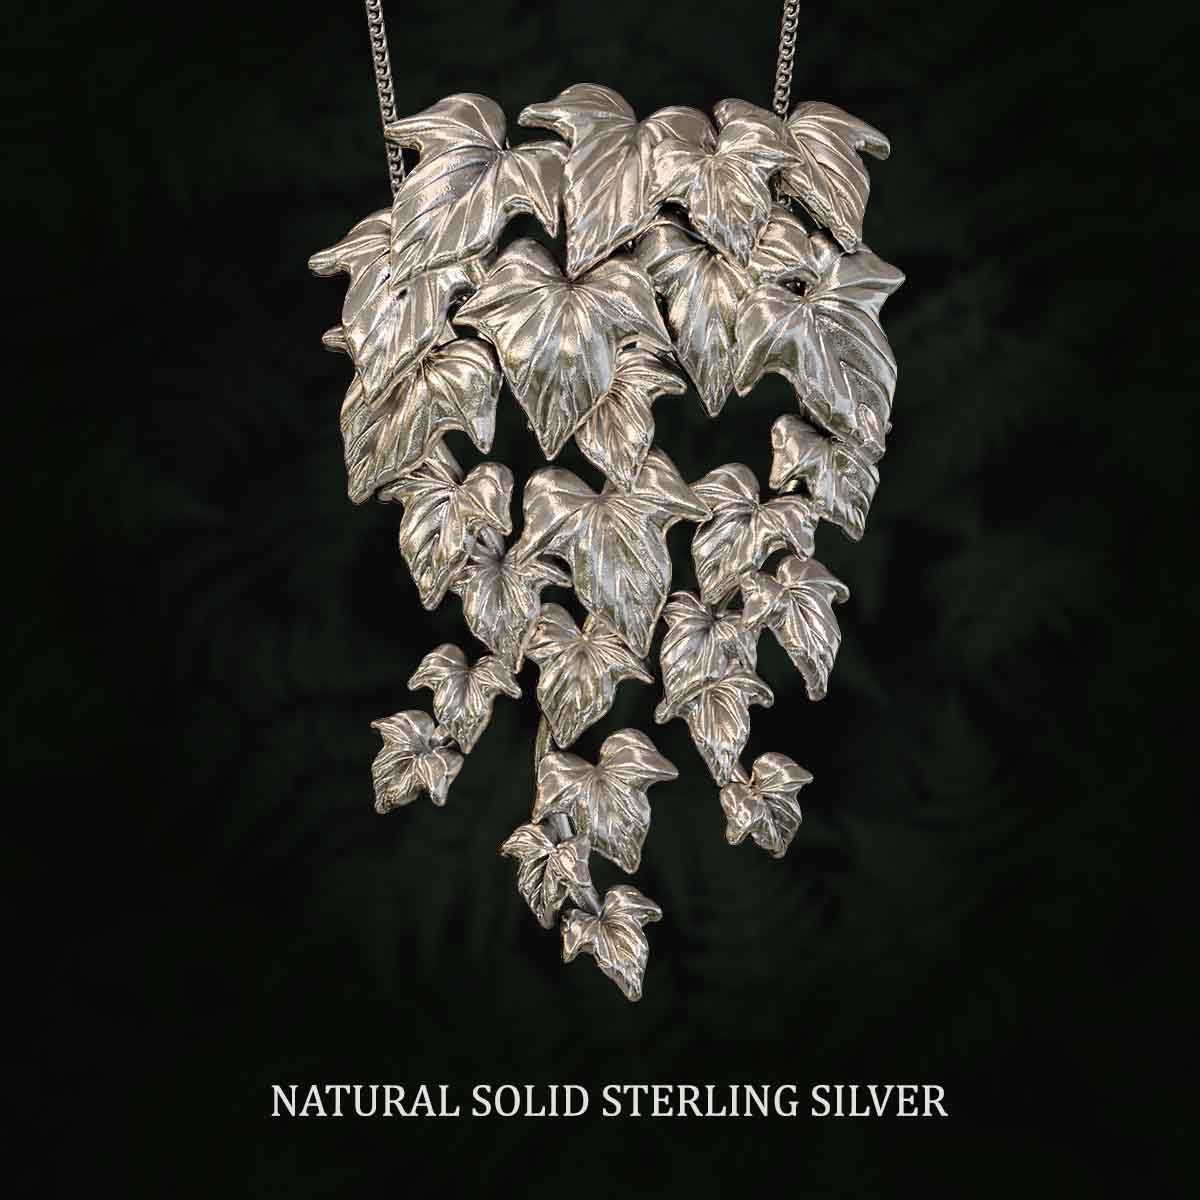 Natural-Satin-Polish-Solid-Sterling-Silver-Flowing-Vine-Large-Pendant-Jewelry-For-Necklace